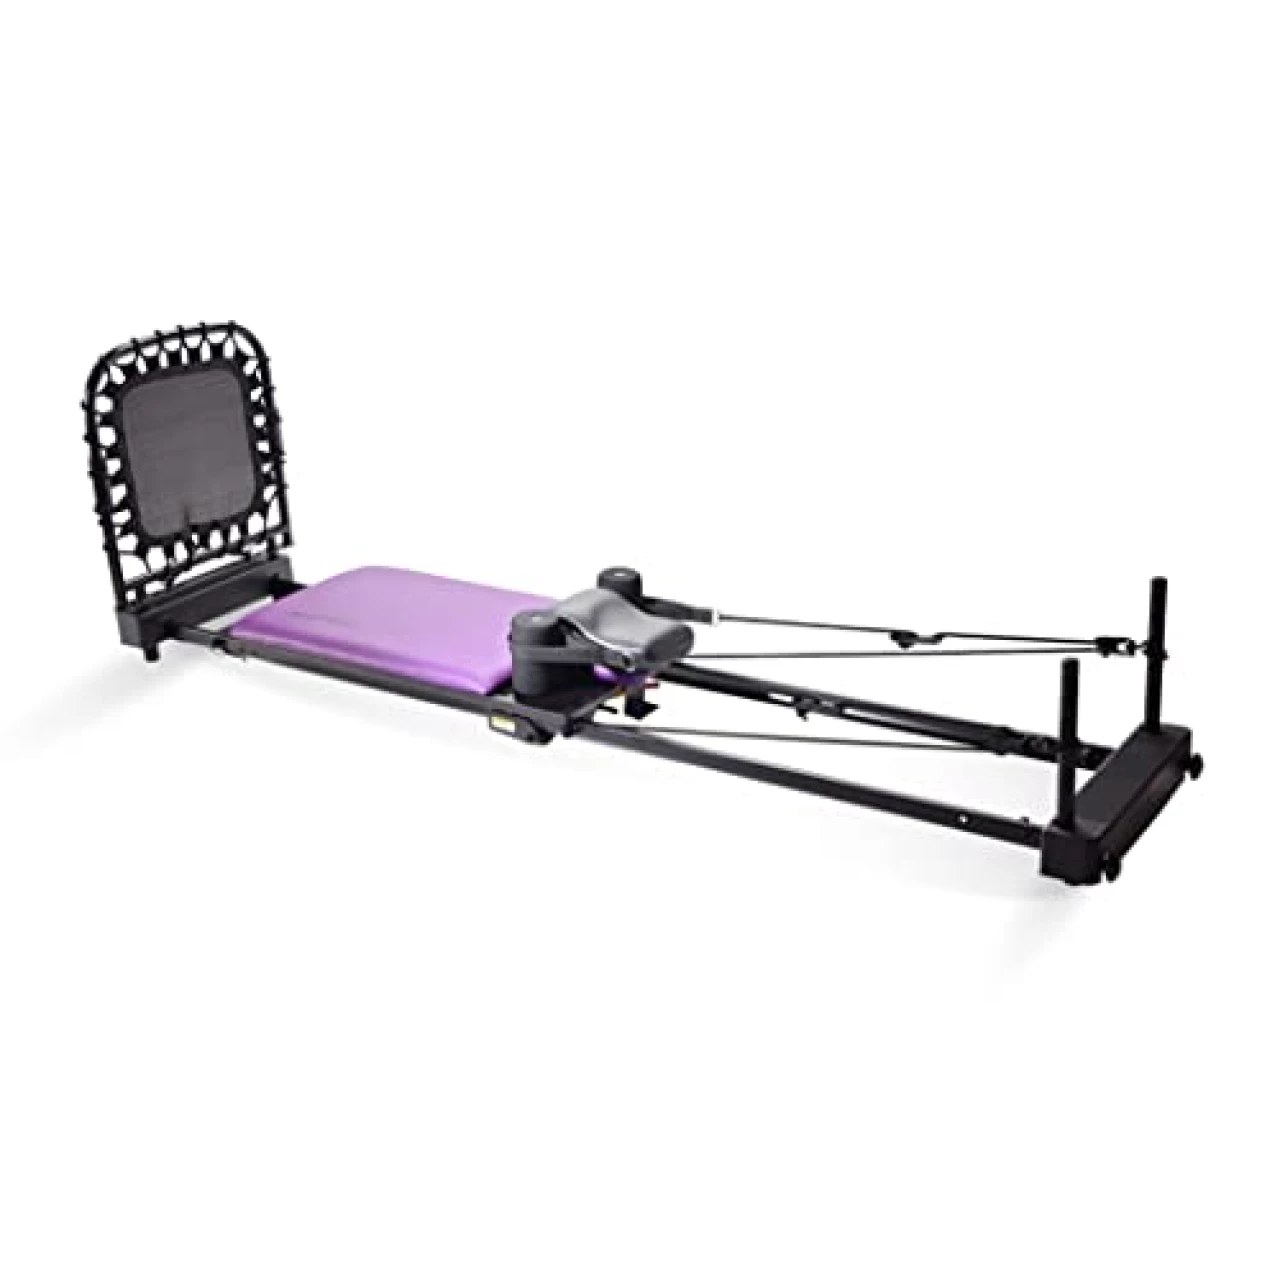 AeroPilates Reformer Plus 379 - Pilates Reformer Workout Machine for Home Gym - Cardio Fitness Rebounder - Up to 300 lbs Weight Capacity